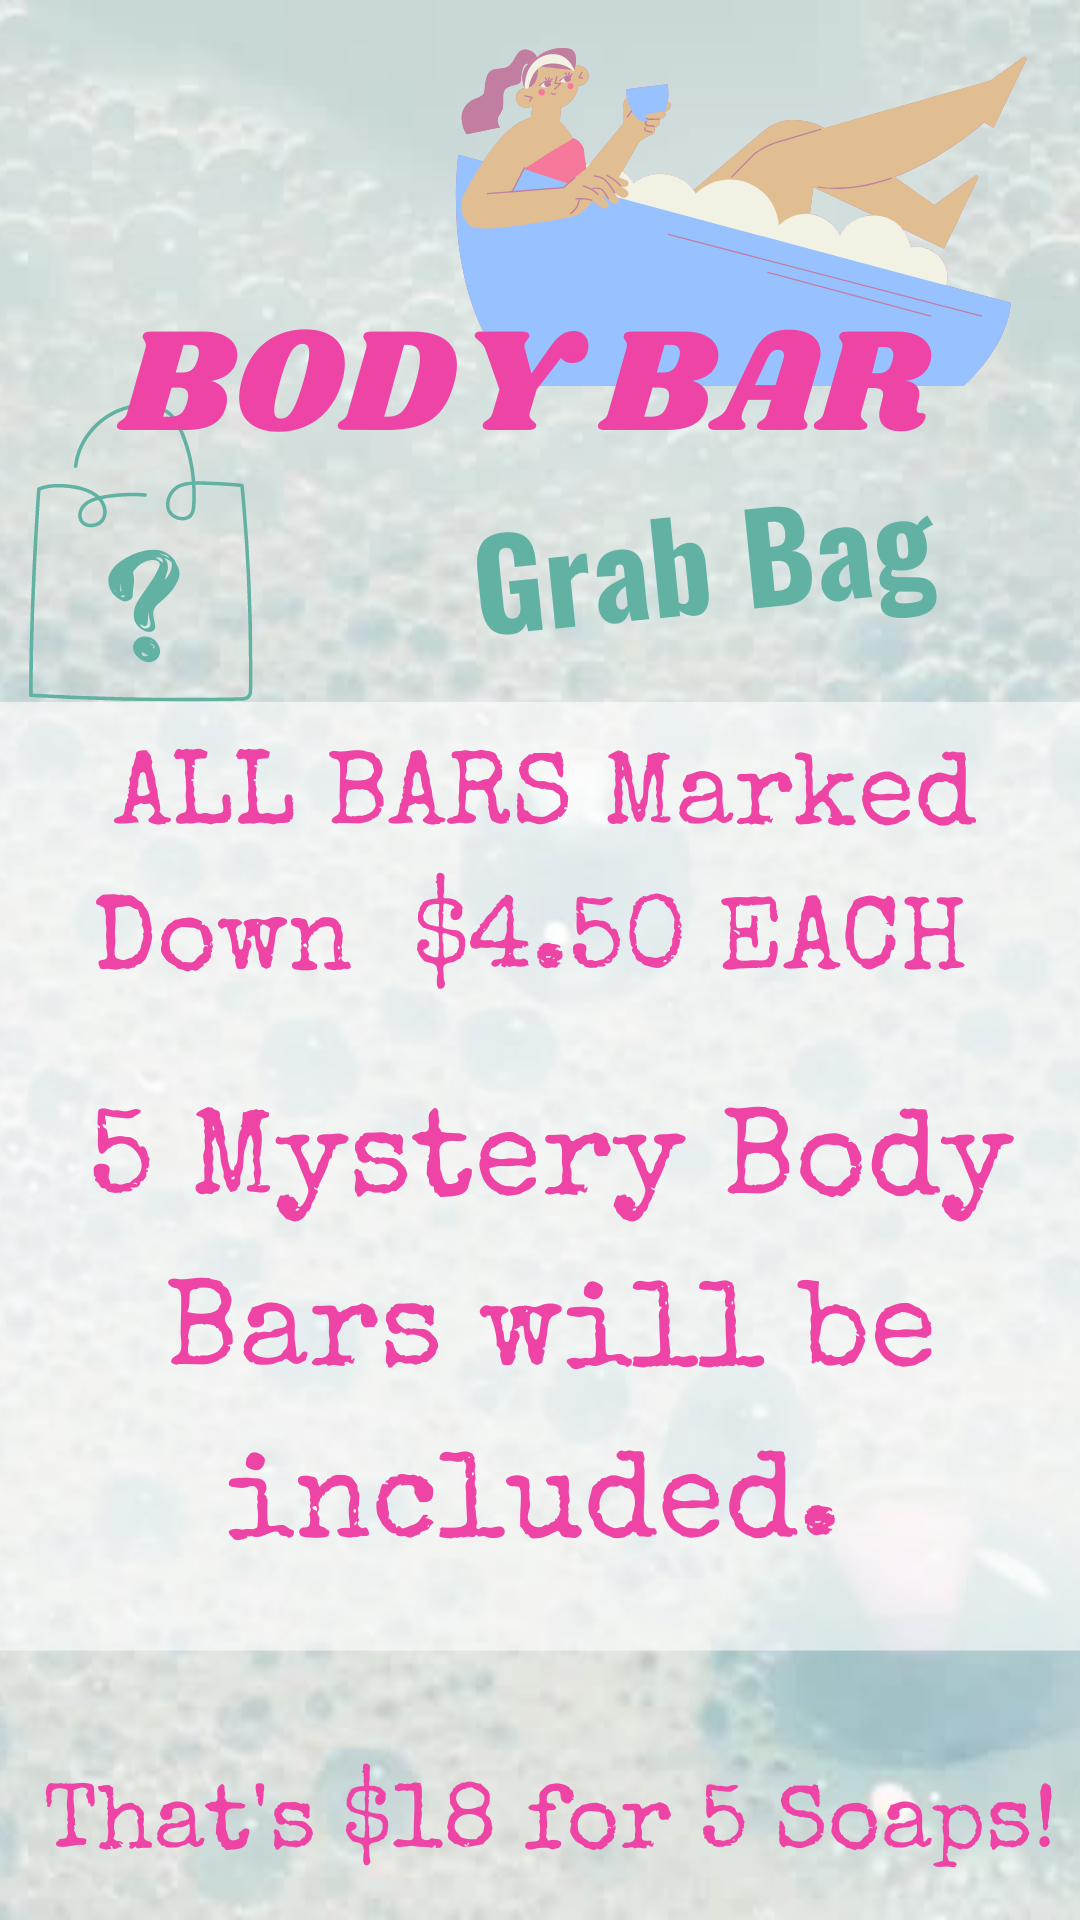 This Mystery Body Bar Grab Bag Sale! is made with love by Sudzy Bums! Shop more unique gift ideas today with Spots Initiatives, the best way to support creators.